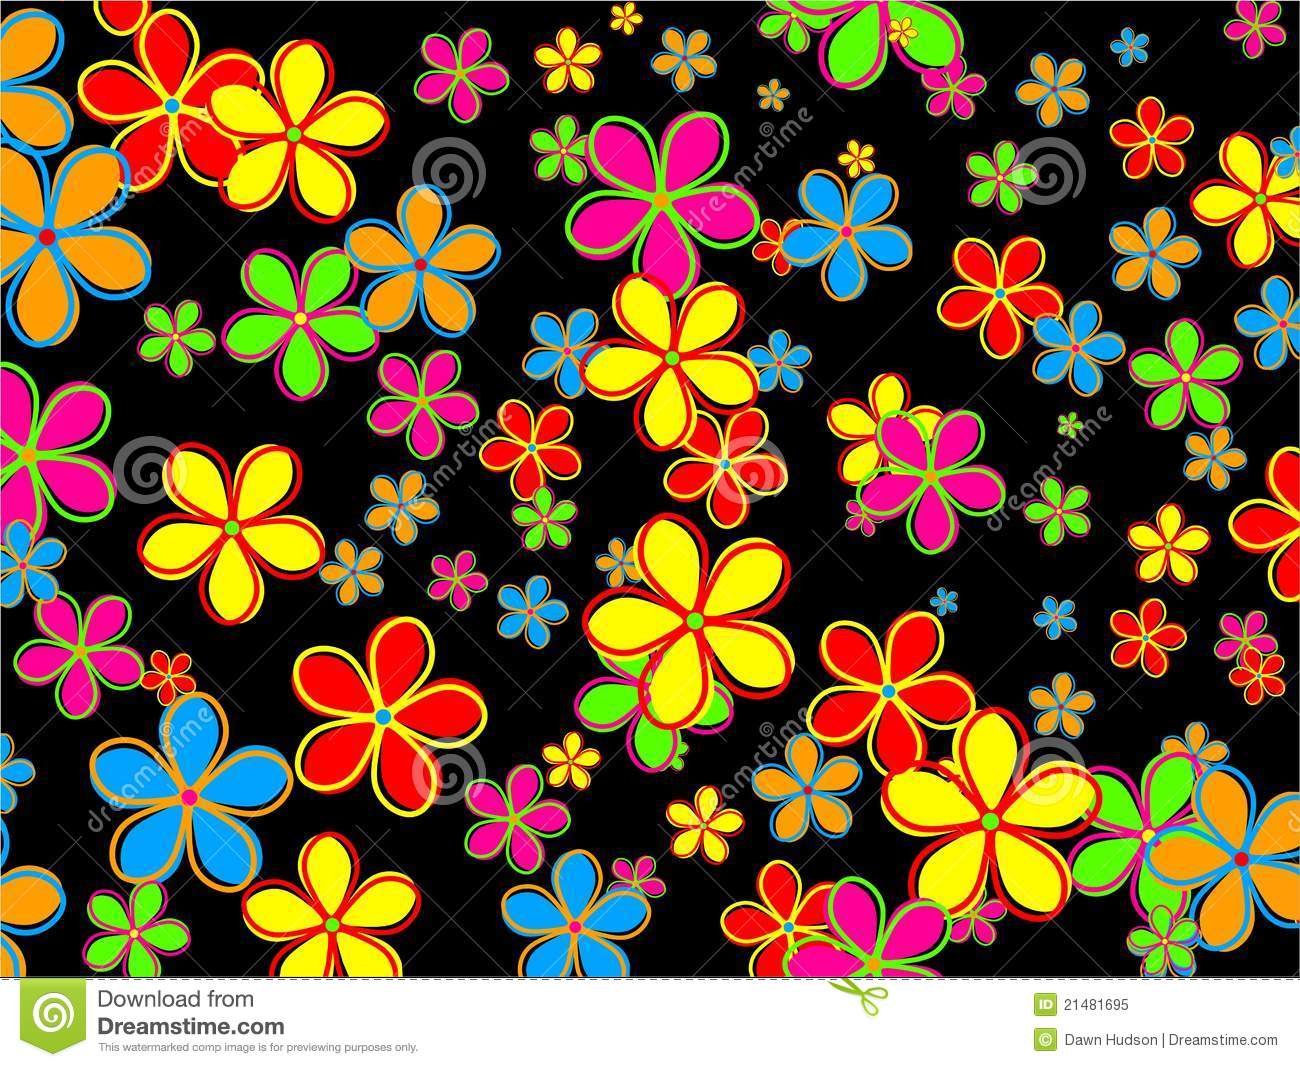 Colorful Flower Wallpaper Designs Image Amp Pictures Becuo